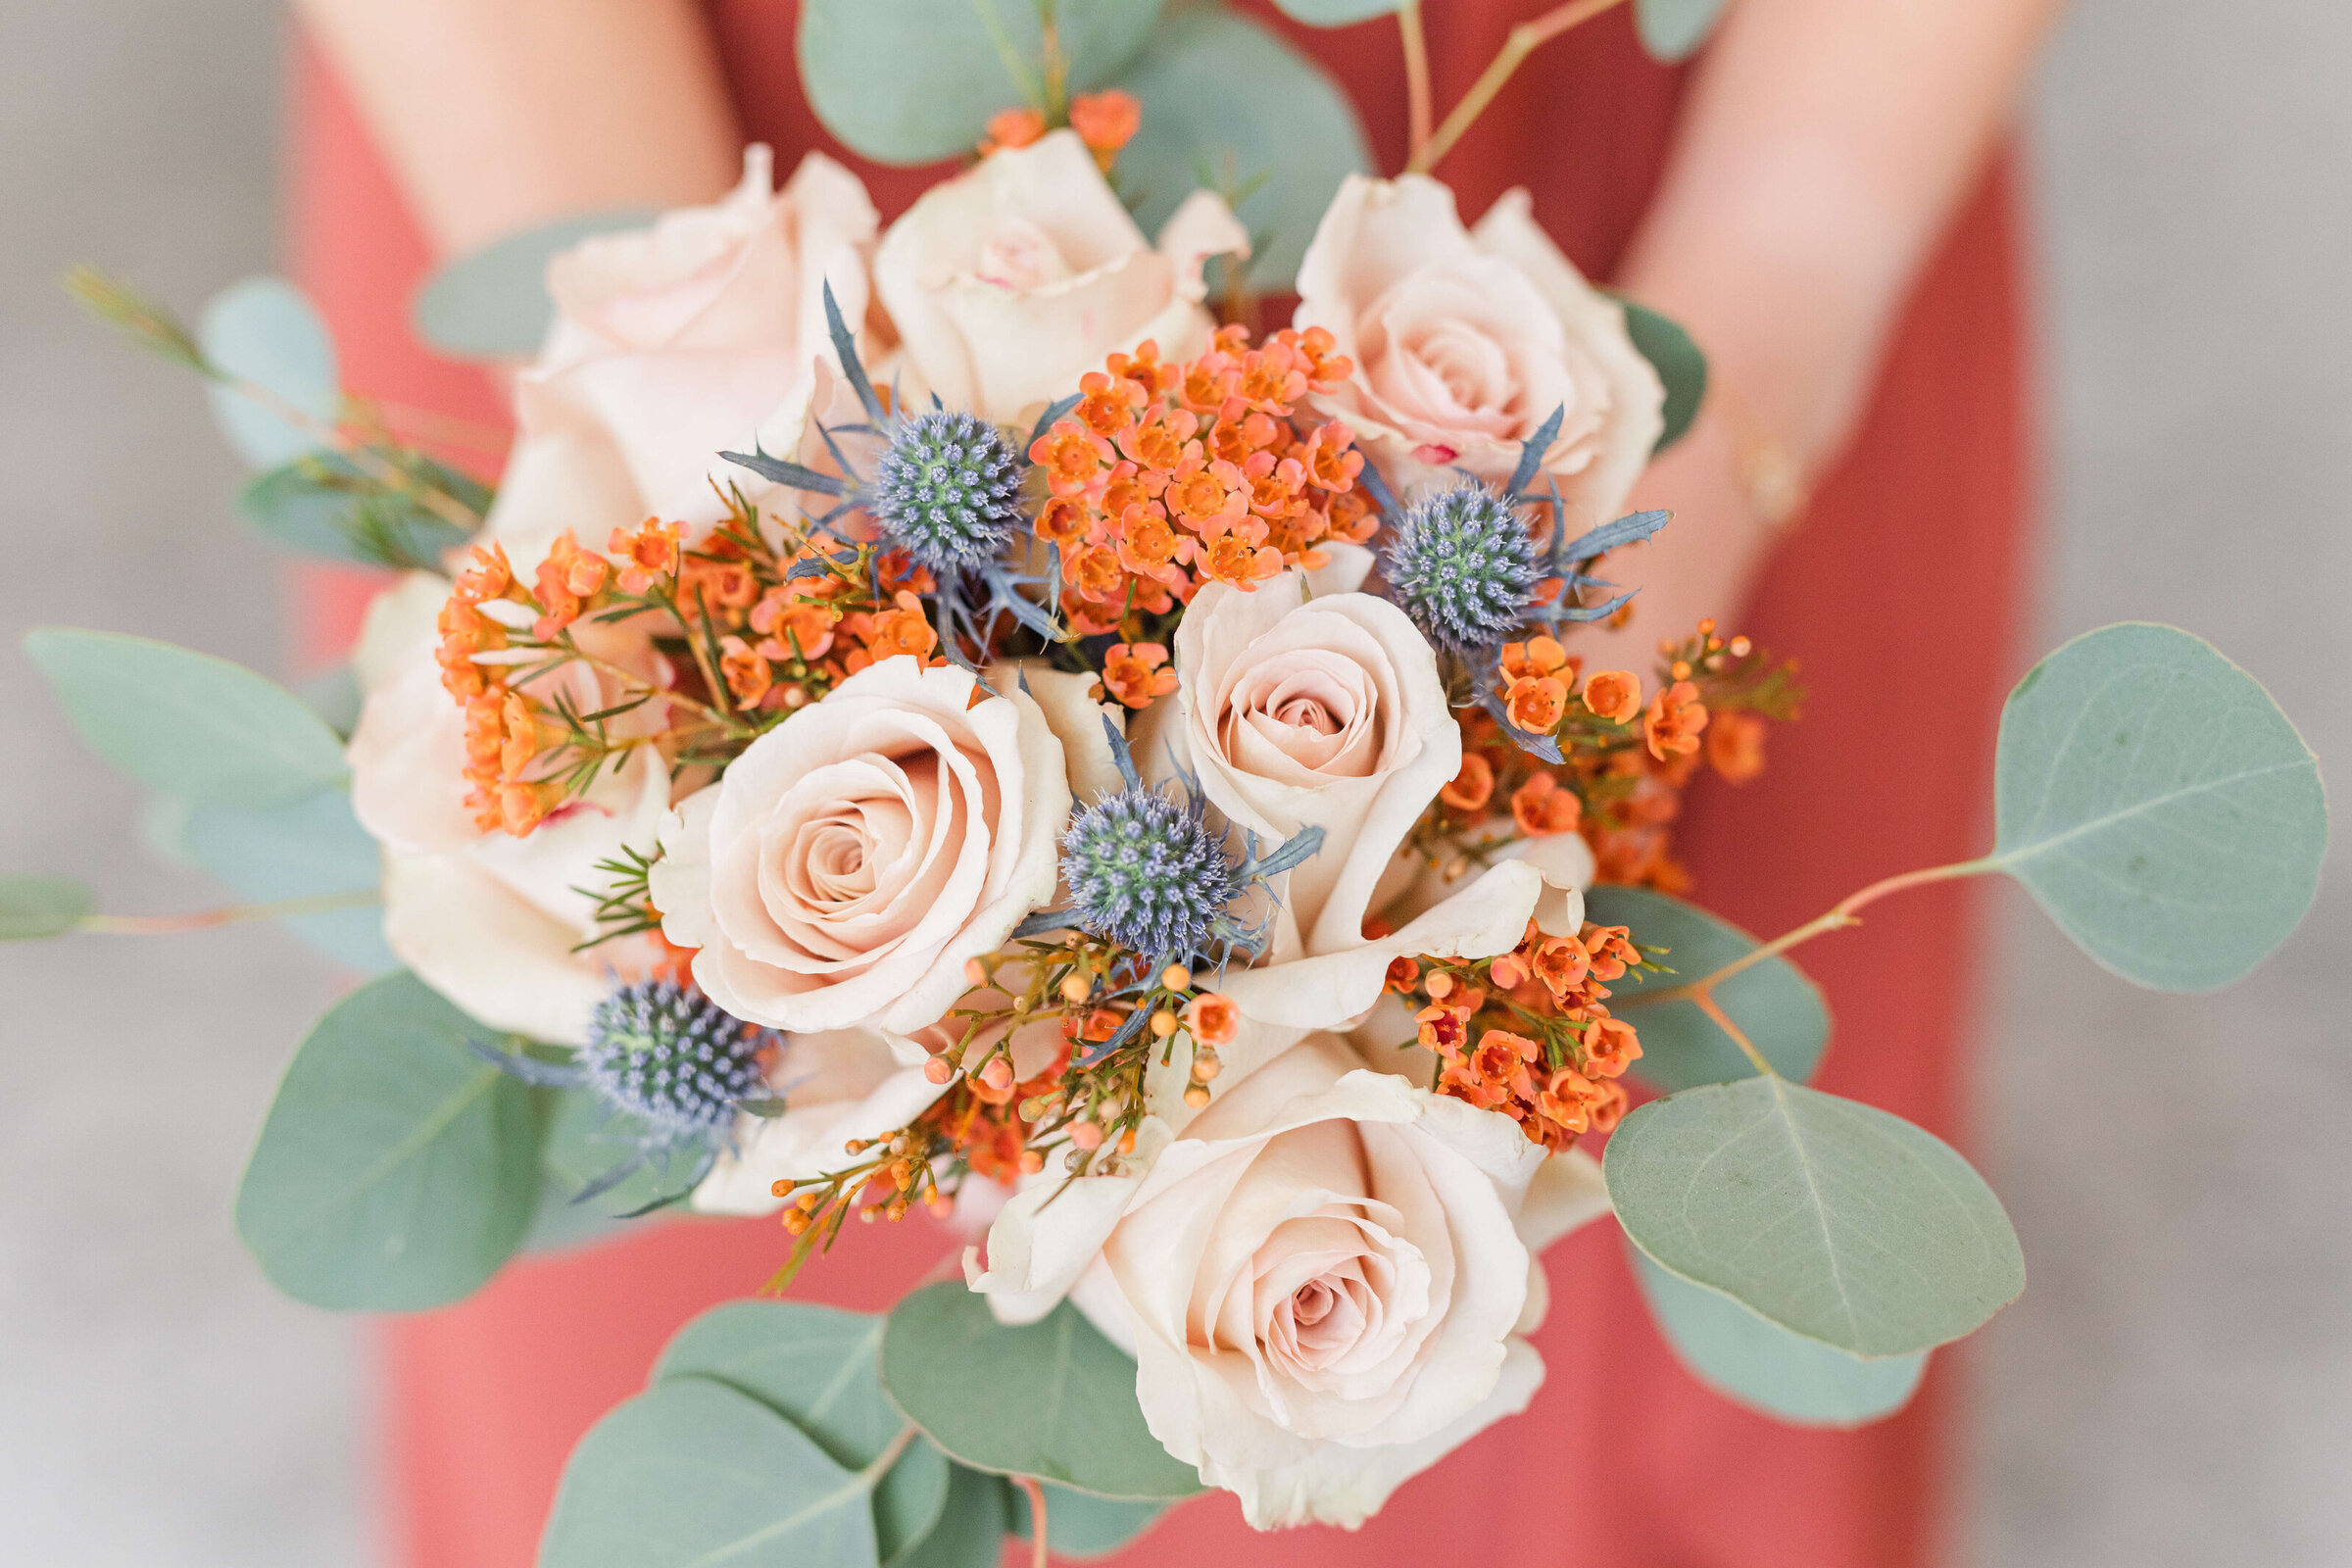 an up close photo of a wedding bouquet that has peach, navy, and orange flowers in it with greenery. The bouquet is held by a bridesmaid in an orange dress.